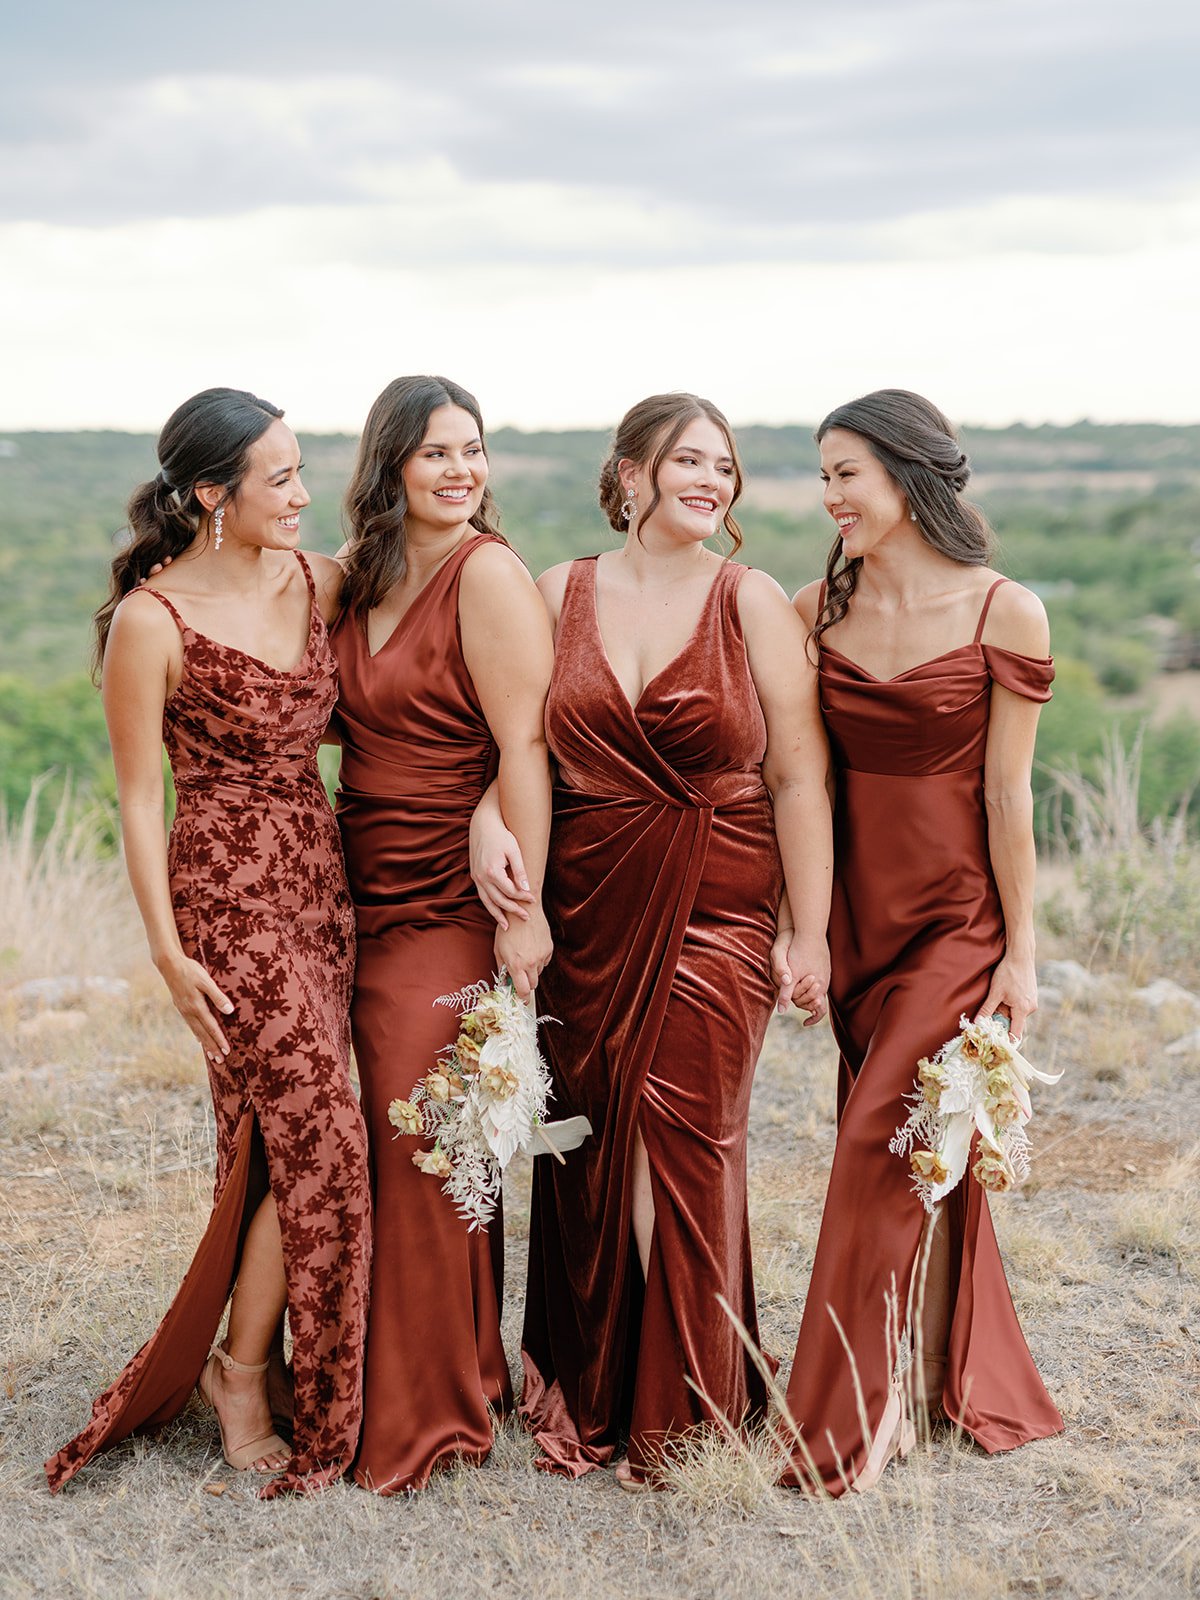 Bridal Style: Revelry - Affordable, Designer Quality Sequin